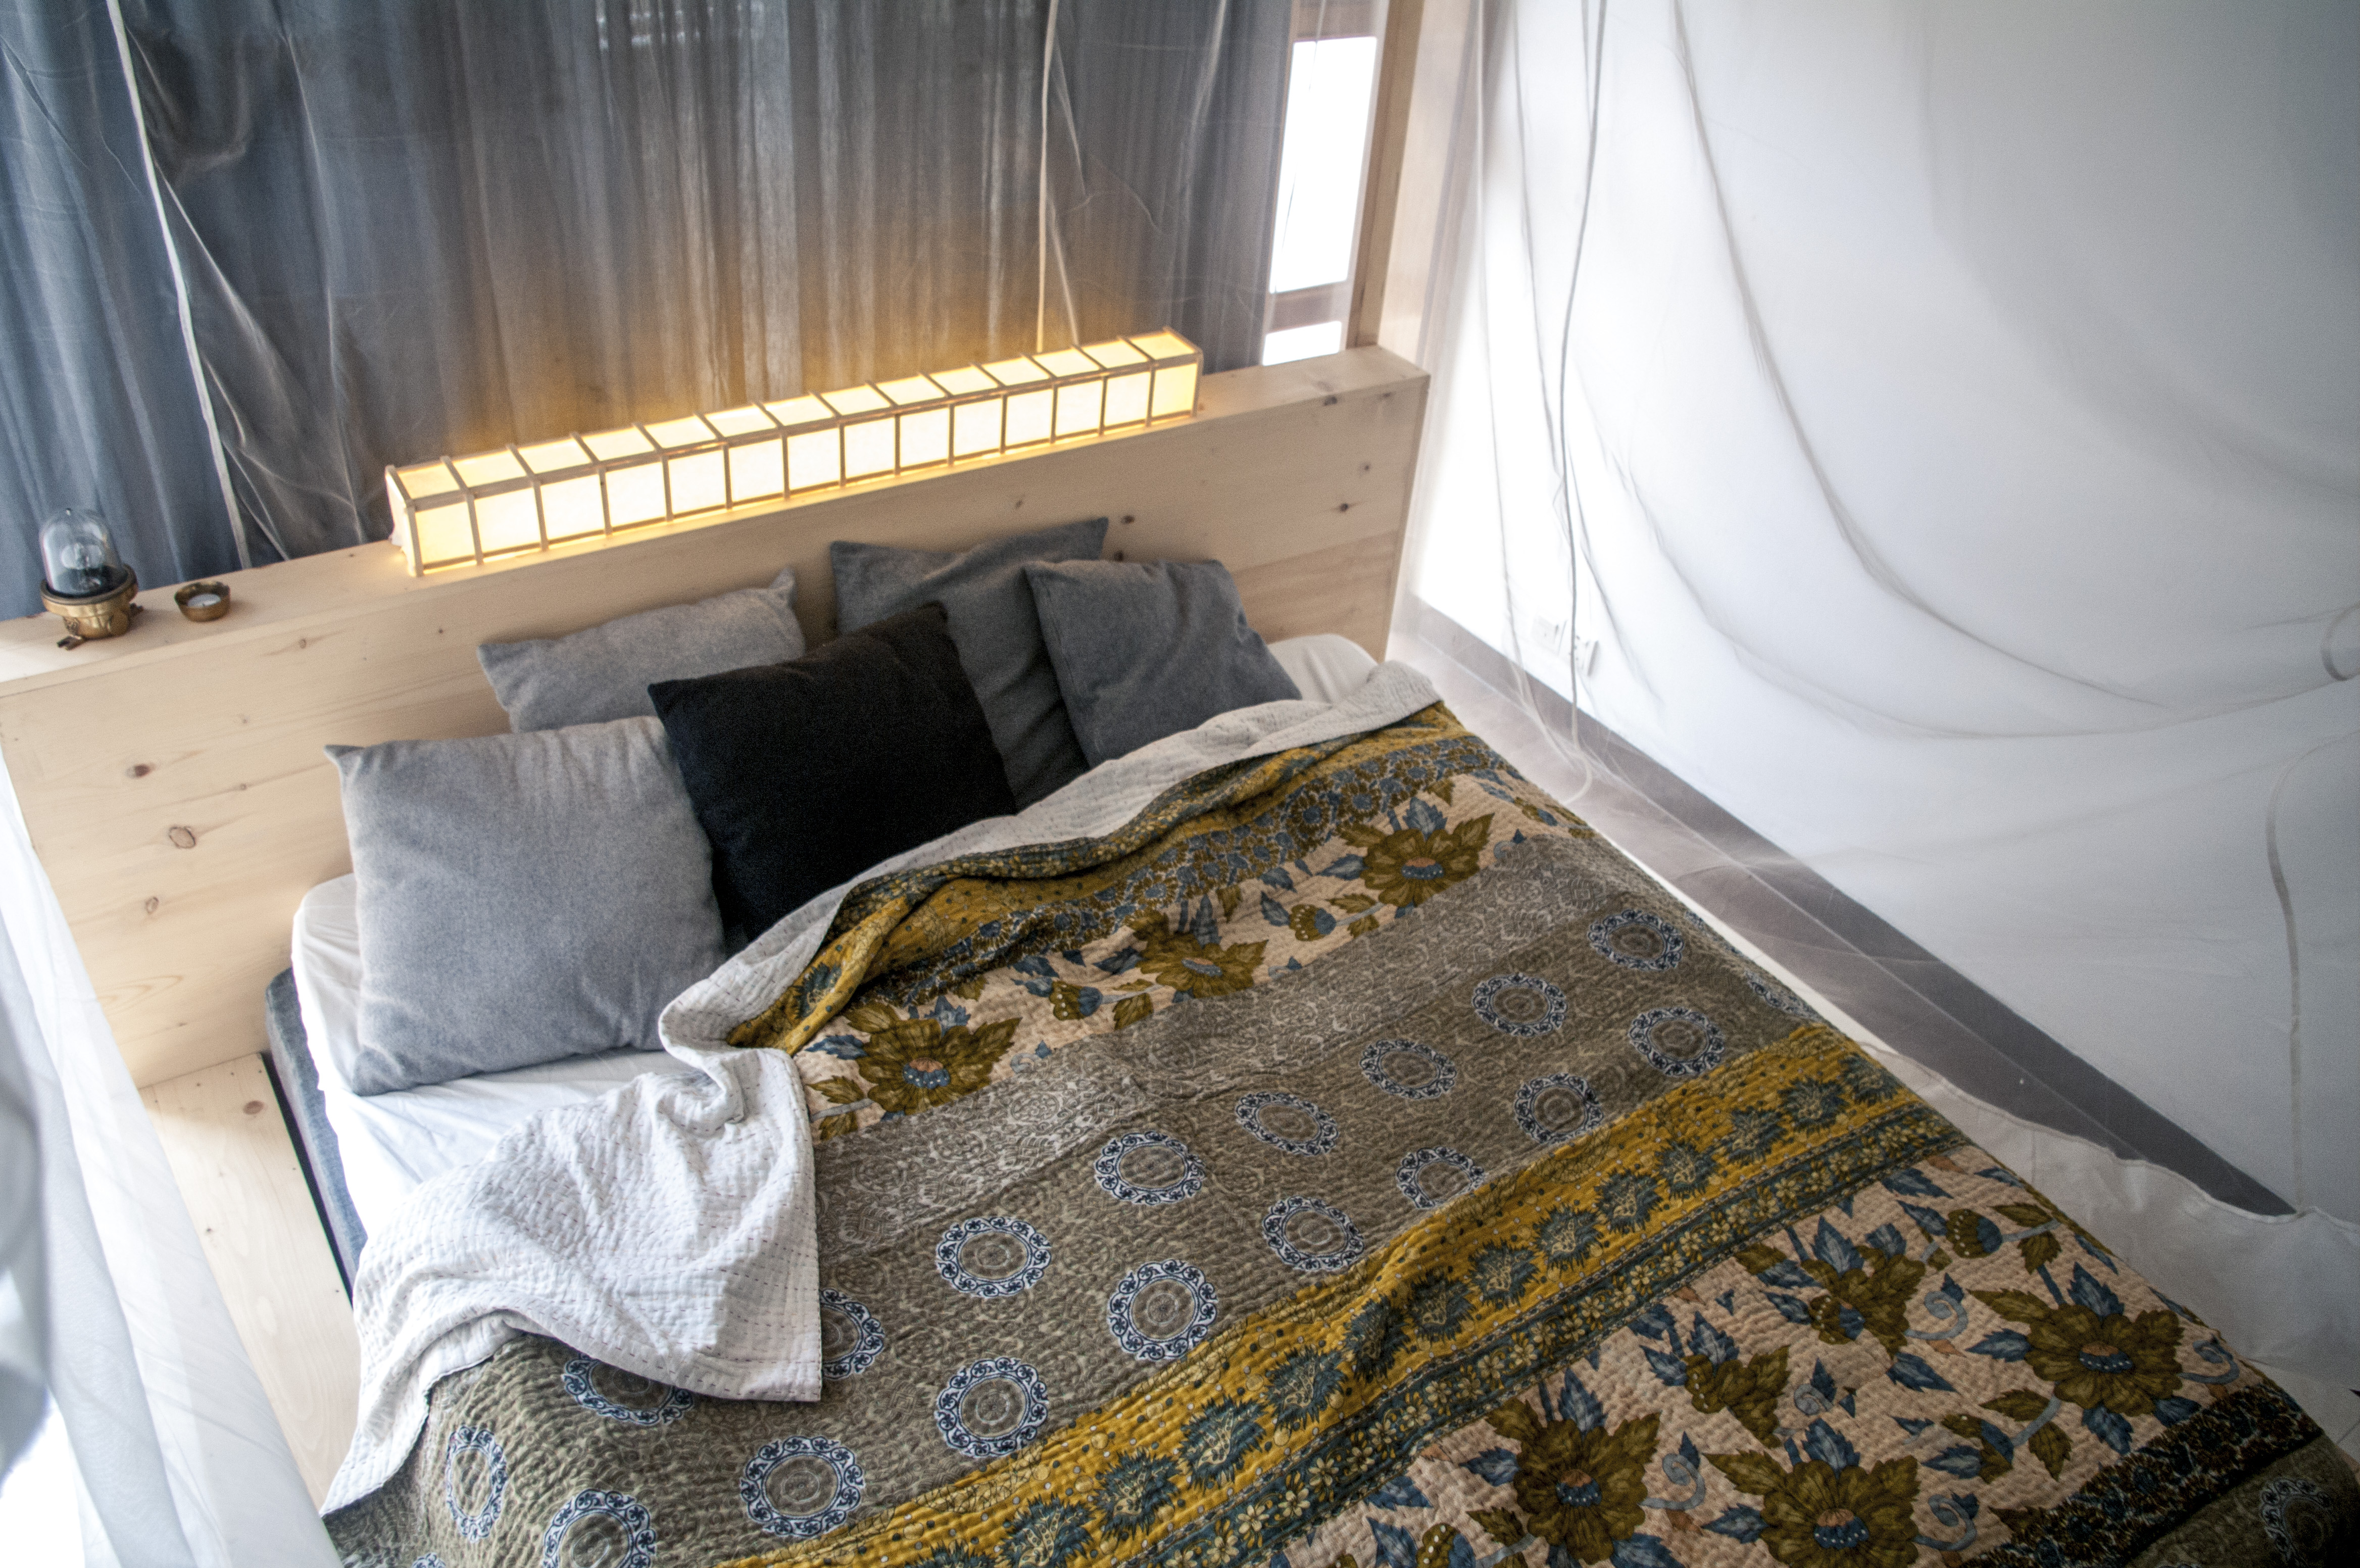 A King Sized Kantha sewn bedspread makes the whole bedroom feel warm and luxurious